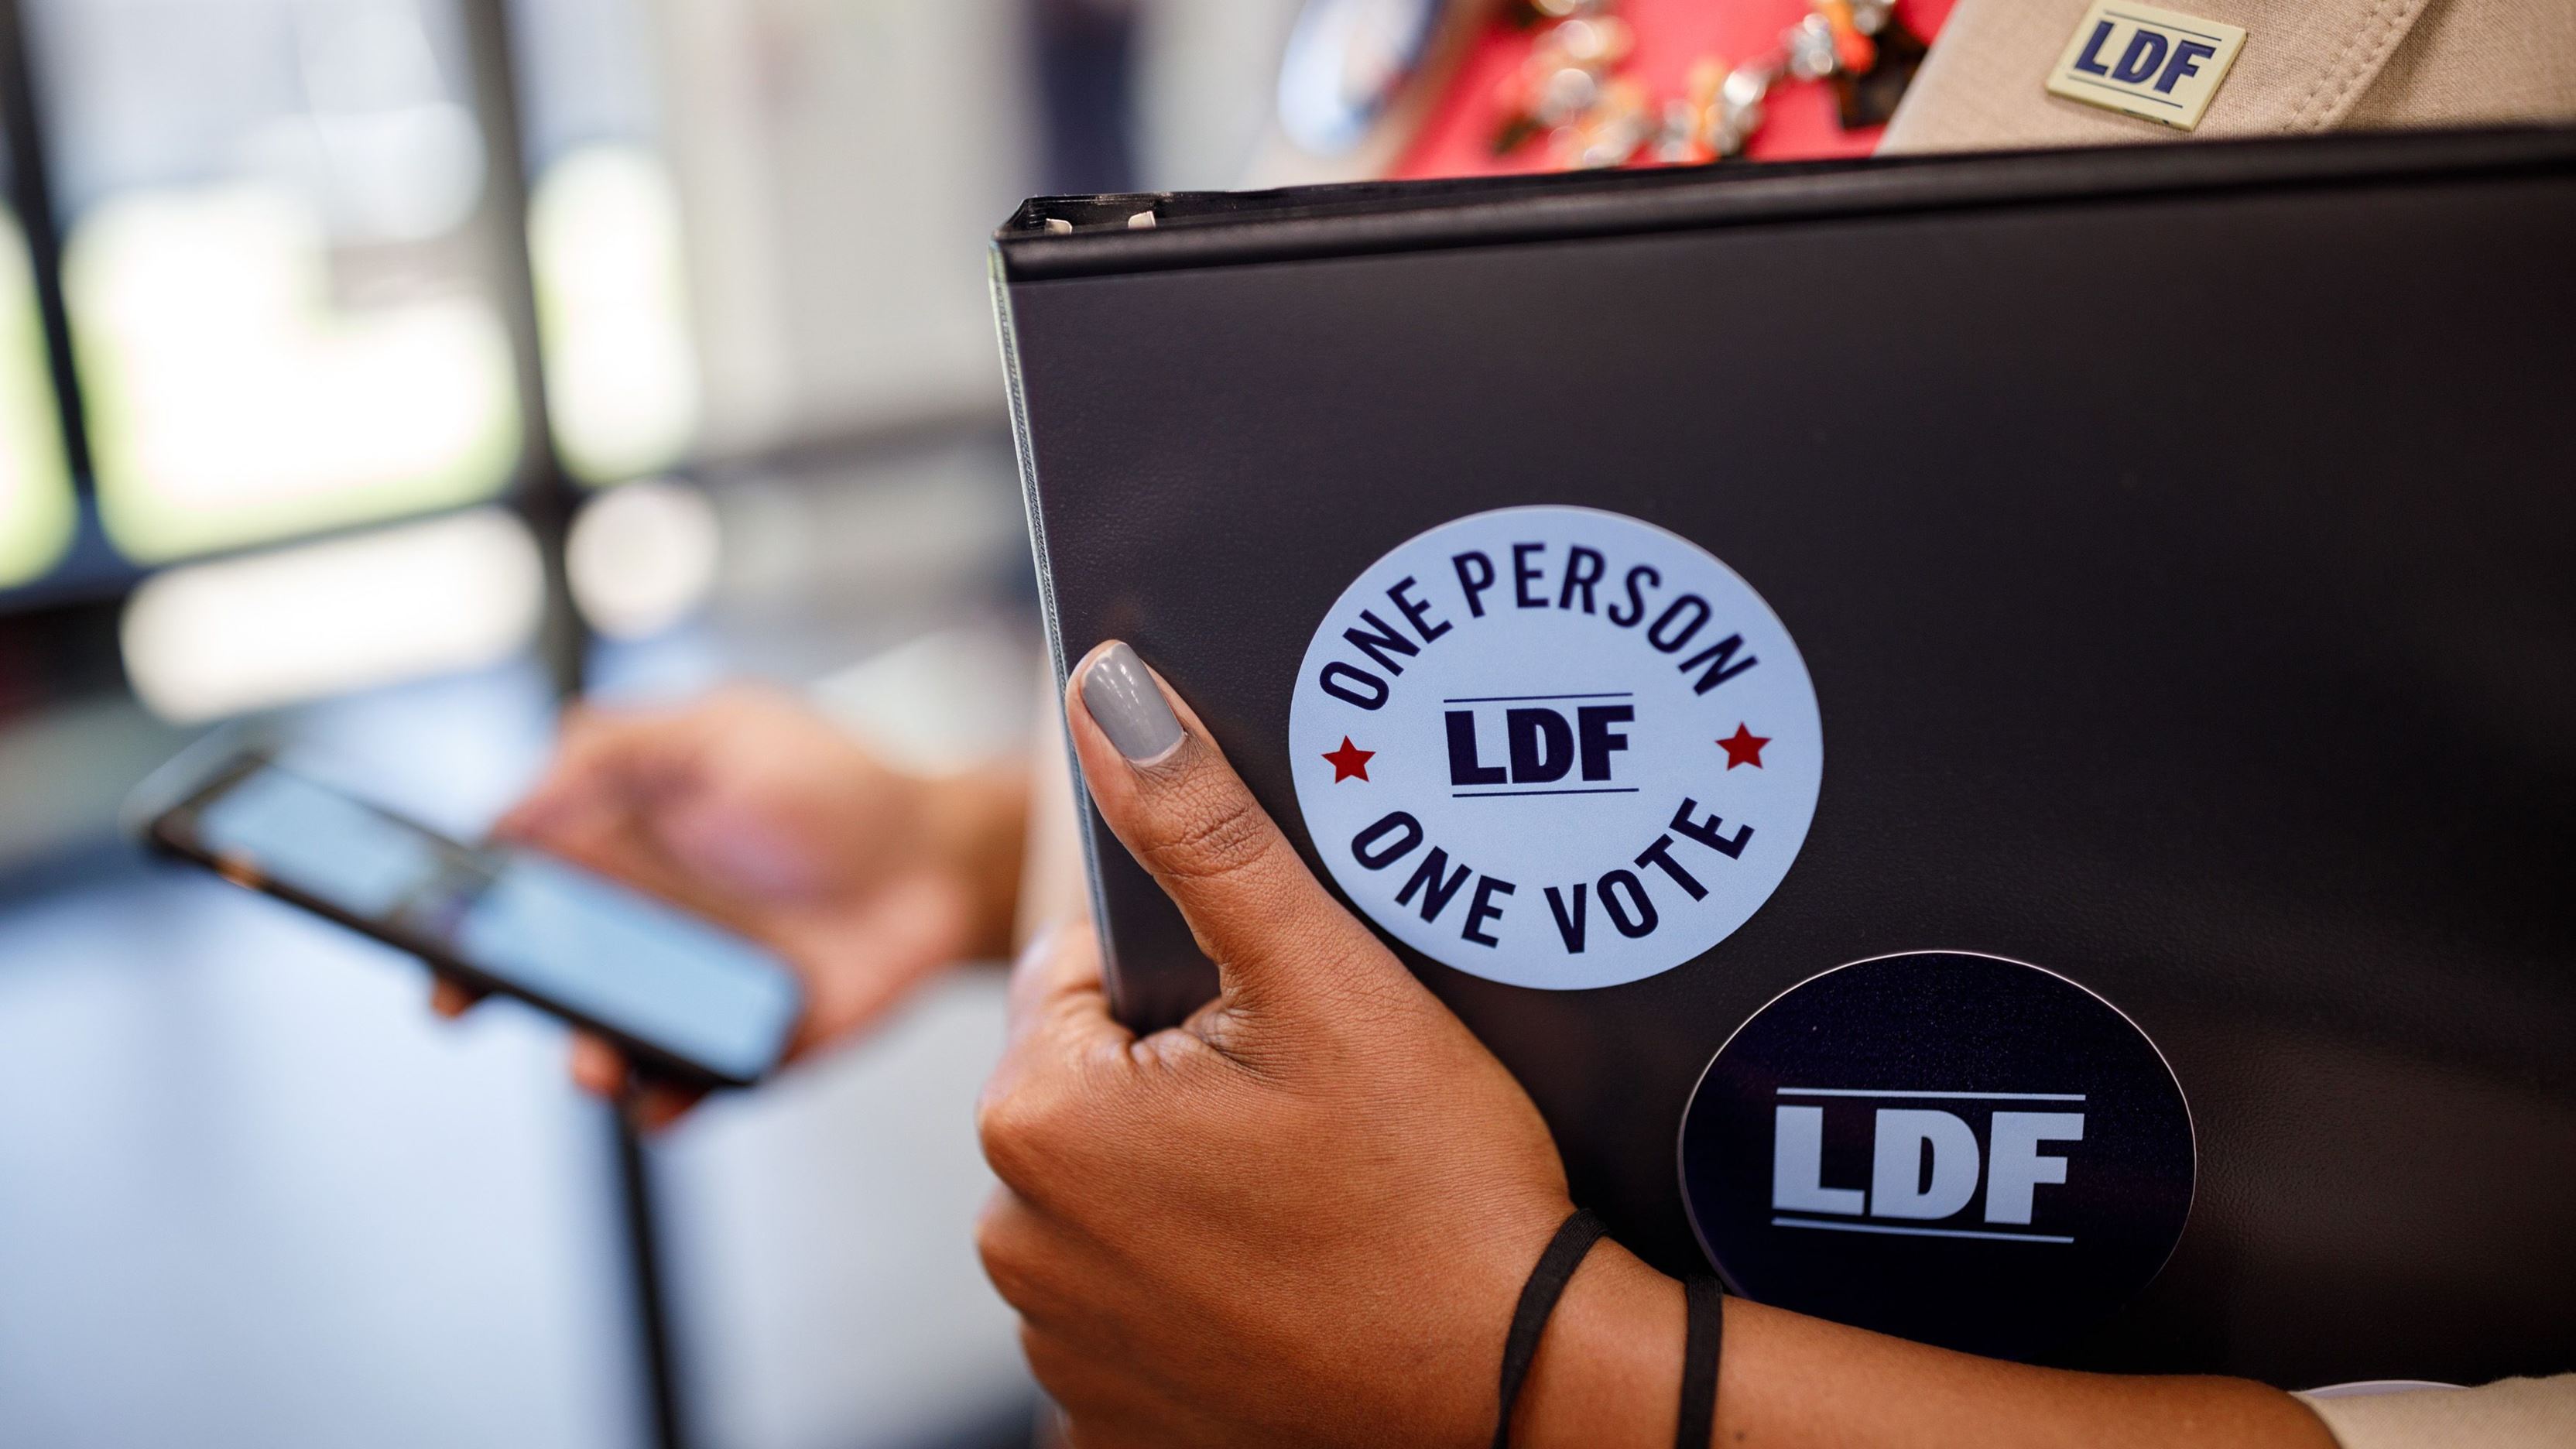 Woman holding a binder with stickers on it that read, "One person, one vote" and "LDF"